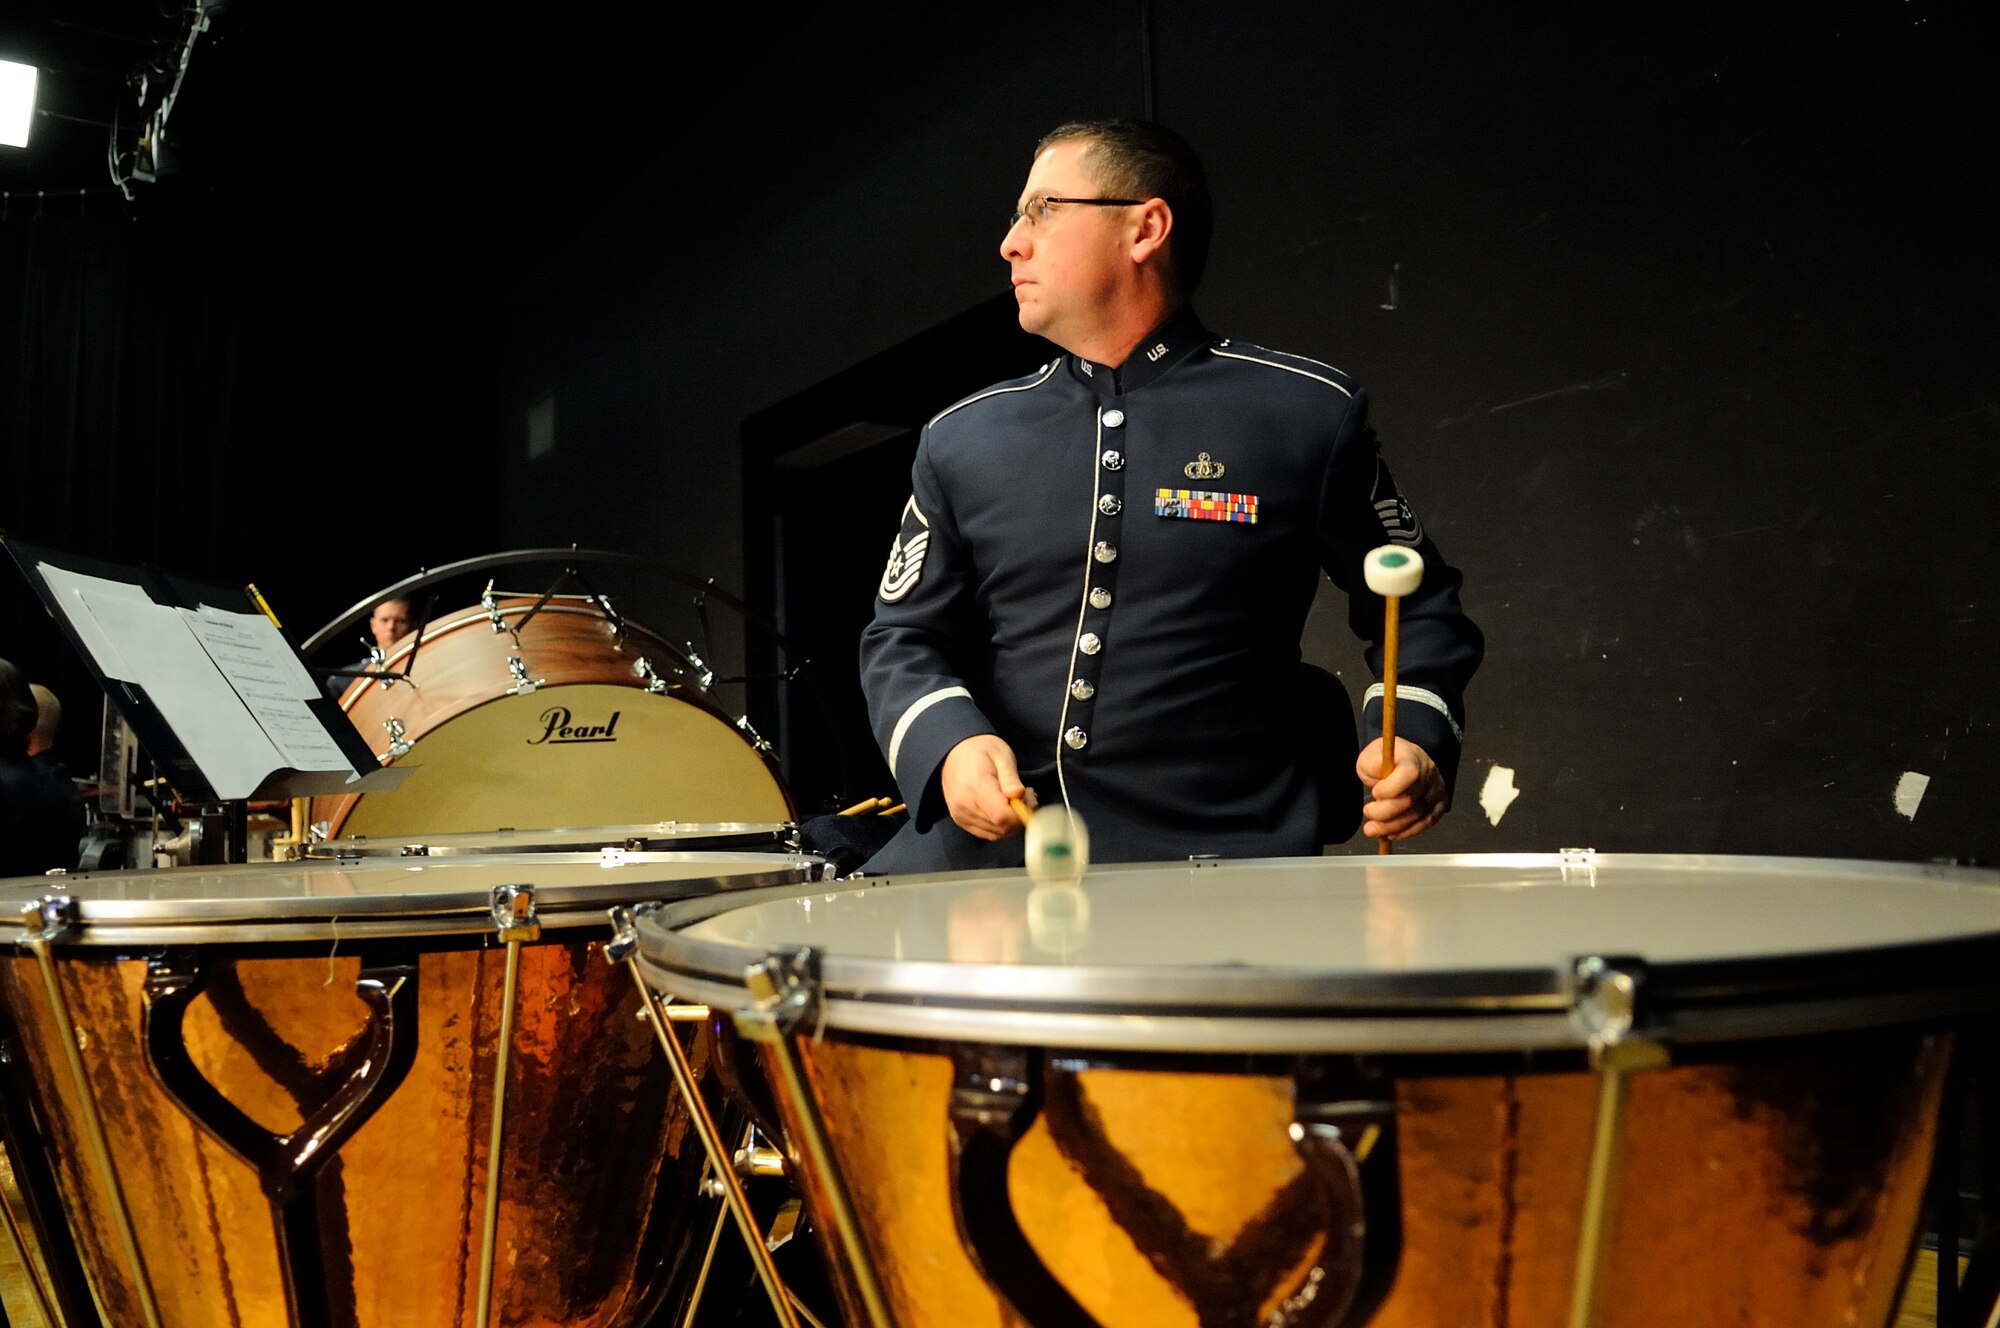 U.S. Air Force Master Sgt. Thomas Rarick, a percussionist with the U.S. Air Force Band Ceremonial Brass and a native of Carlisle, Pa., plays during a concert at The First Academy Faith Hall in Orlando, Fla., Jan. 14, 2011.  The Ceremonial Brass honored Tuskegee Airmen, the first African American military aviators in the U.S. armed forces, during their performance, playing a new work entitle "Red Tail Skirmish."  U.S. Air Force photo by Master Sgt. Adam M. Stump/Released.